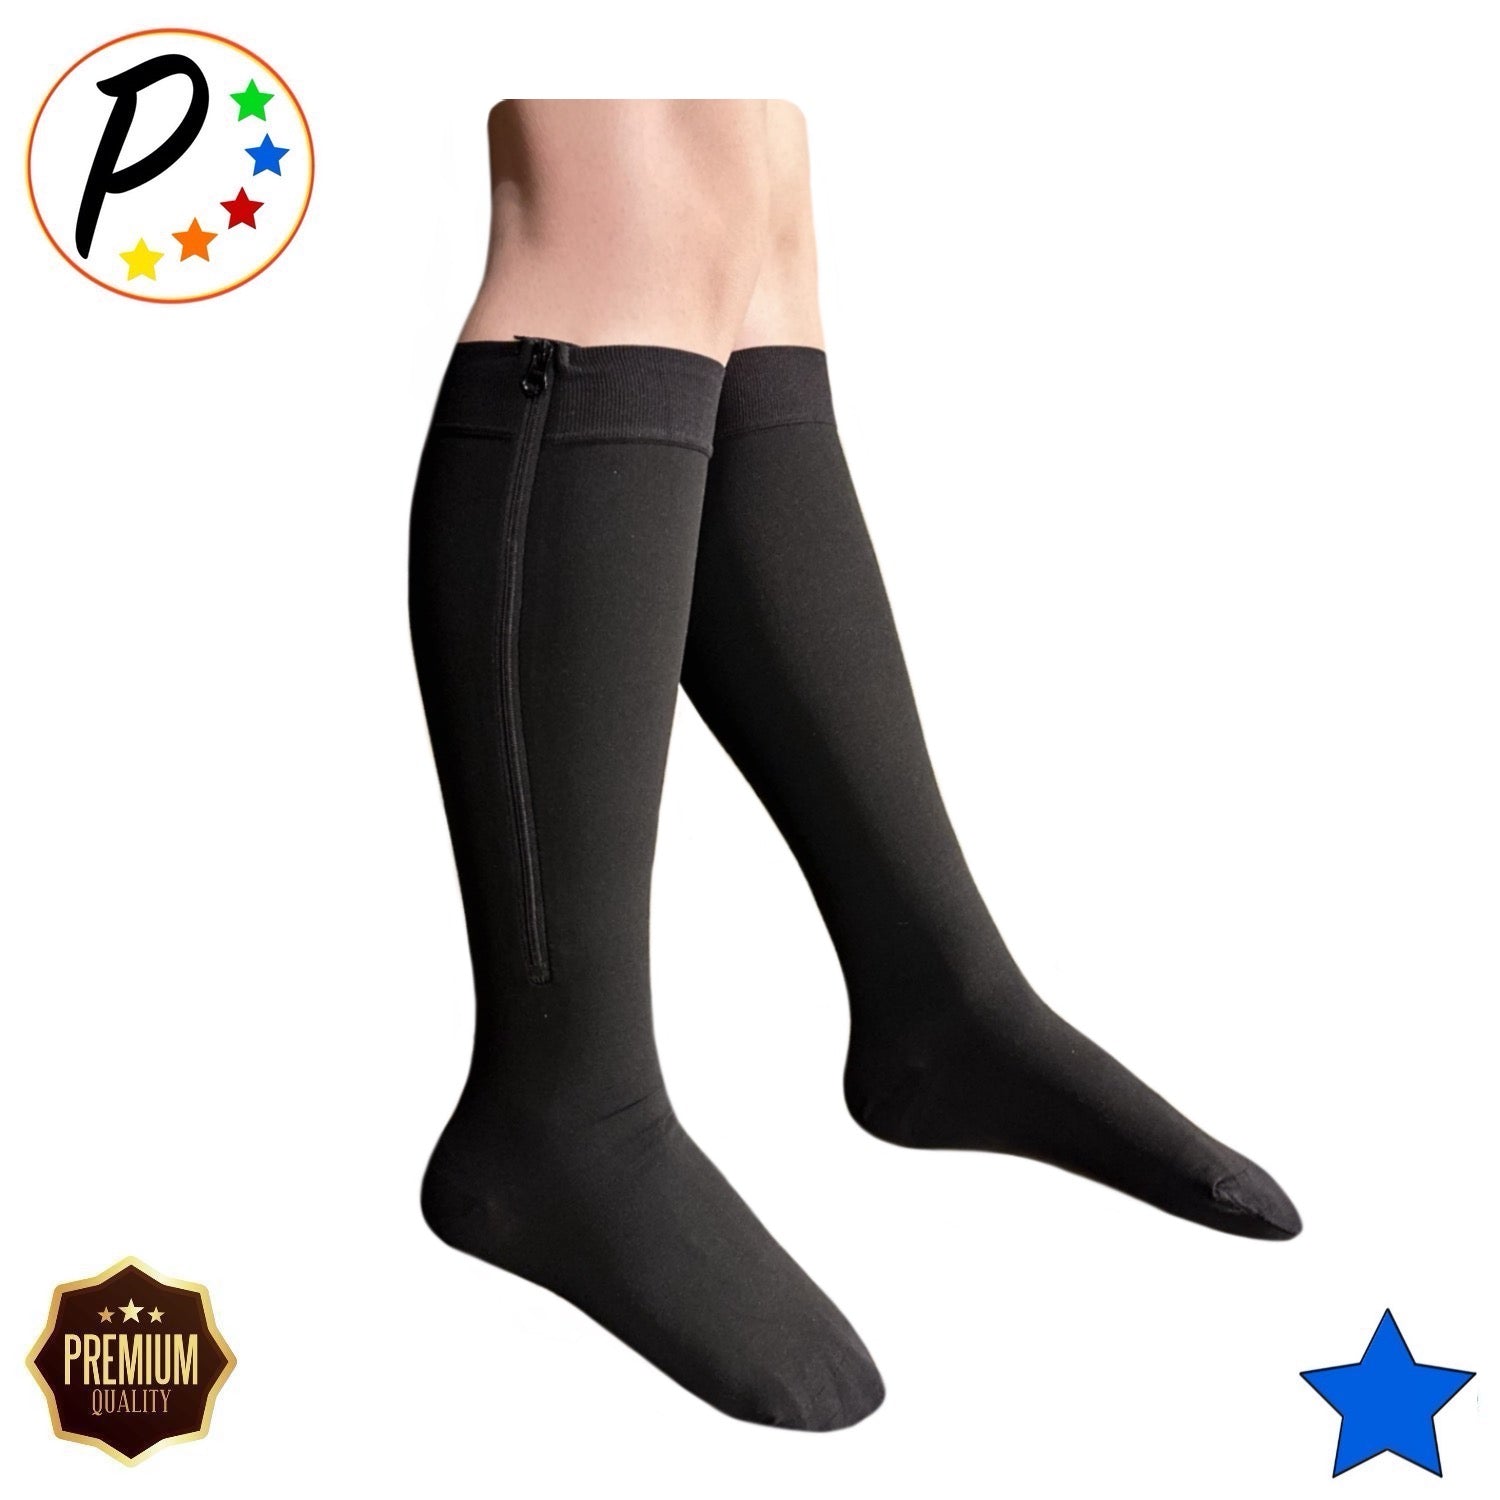 Venous Ulcer Open Toe Compression Stockings 30-40 mmhg with Zipper